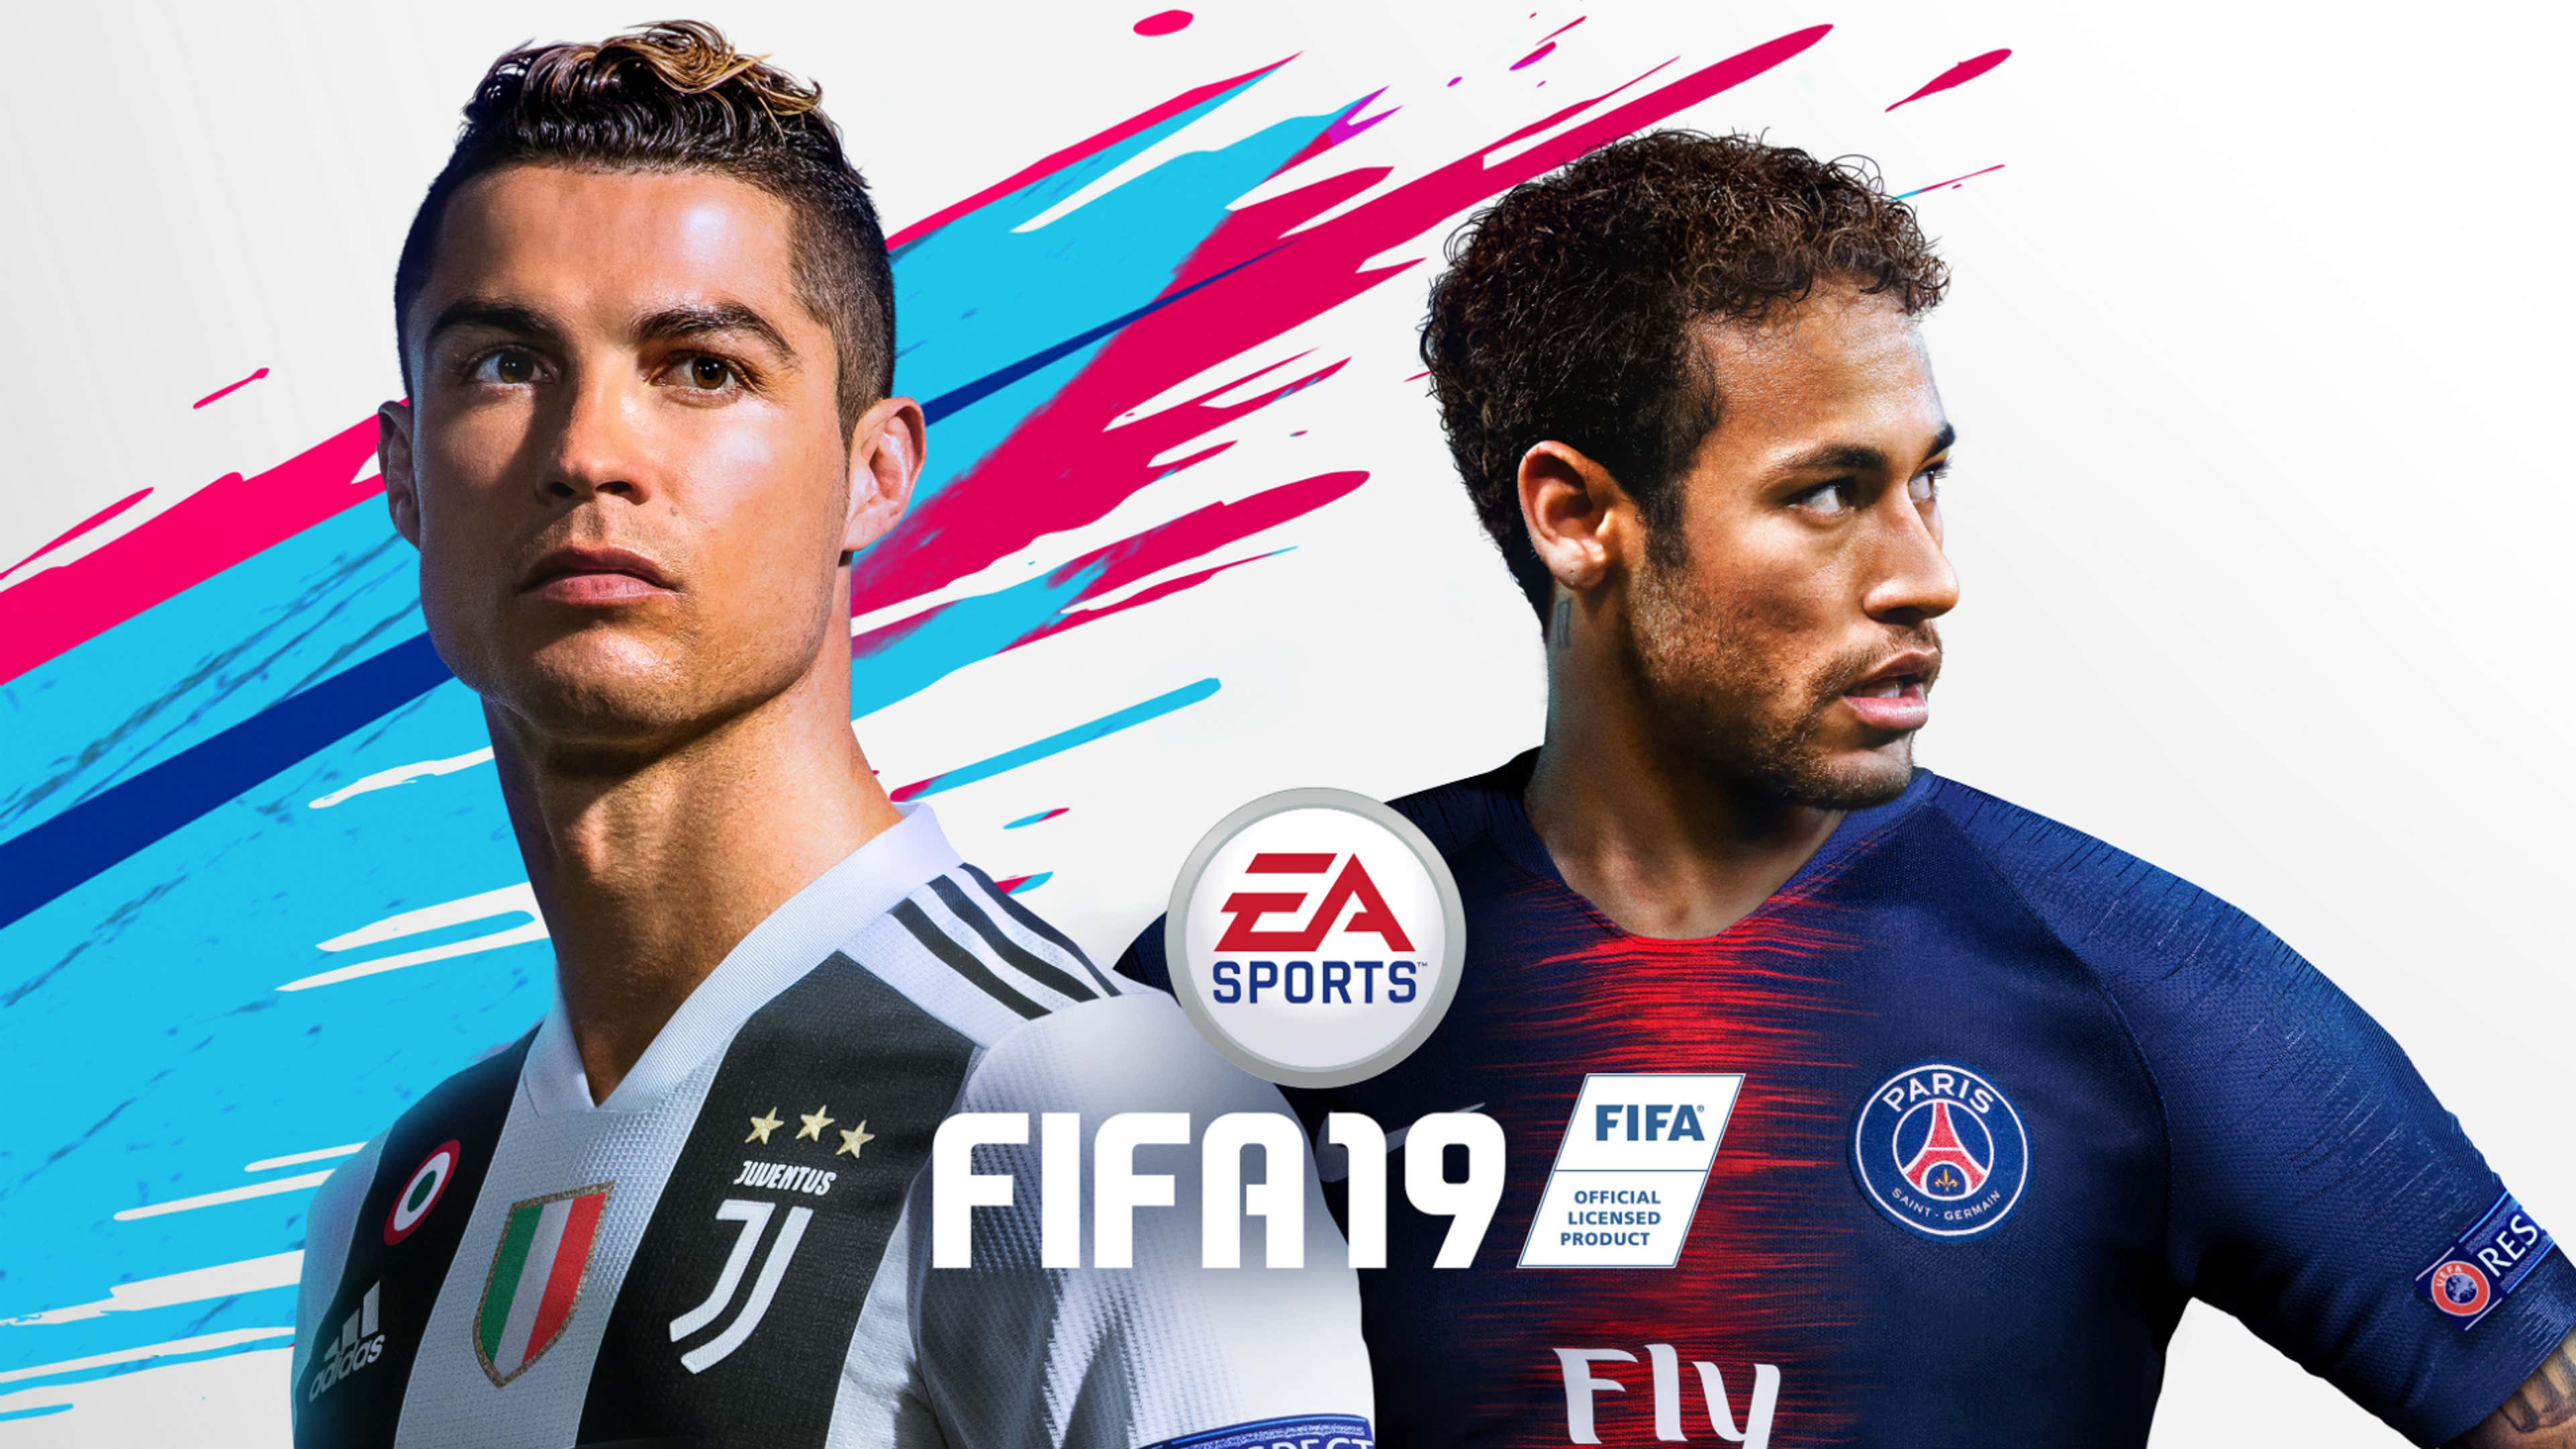 FIFA 19 web app: All you need to know about the EA Sports